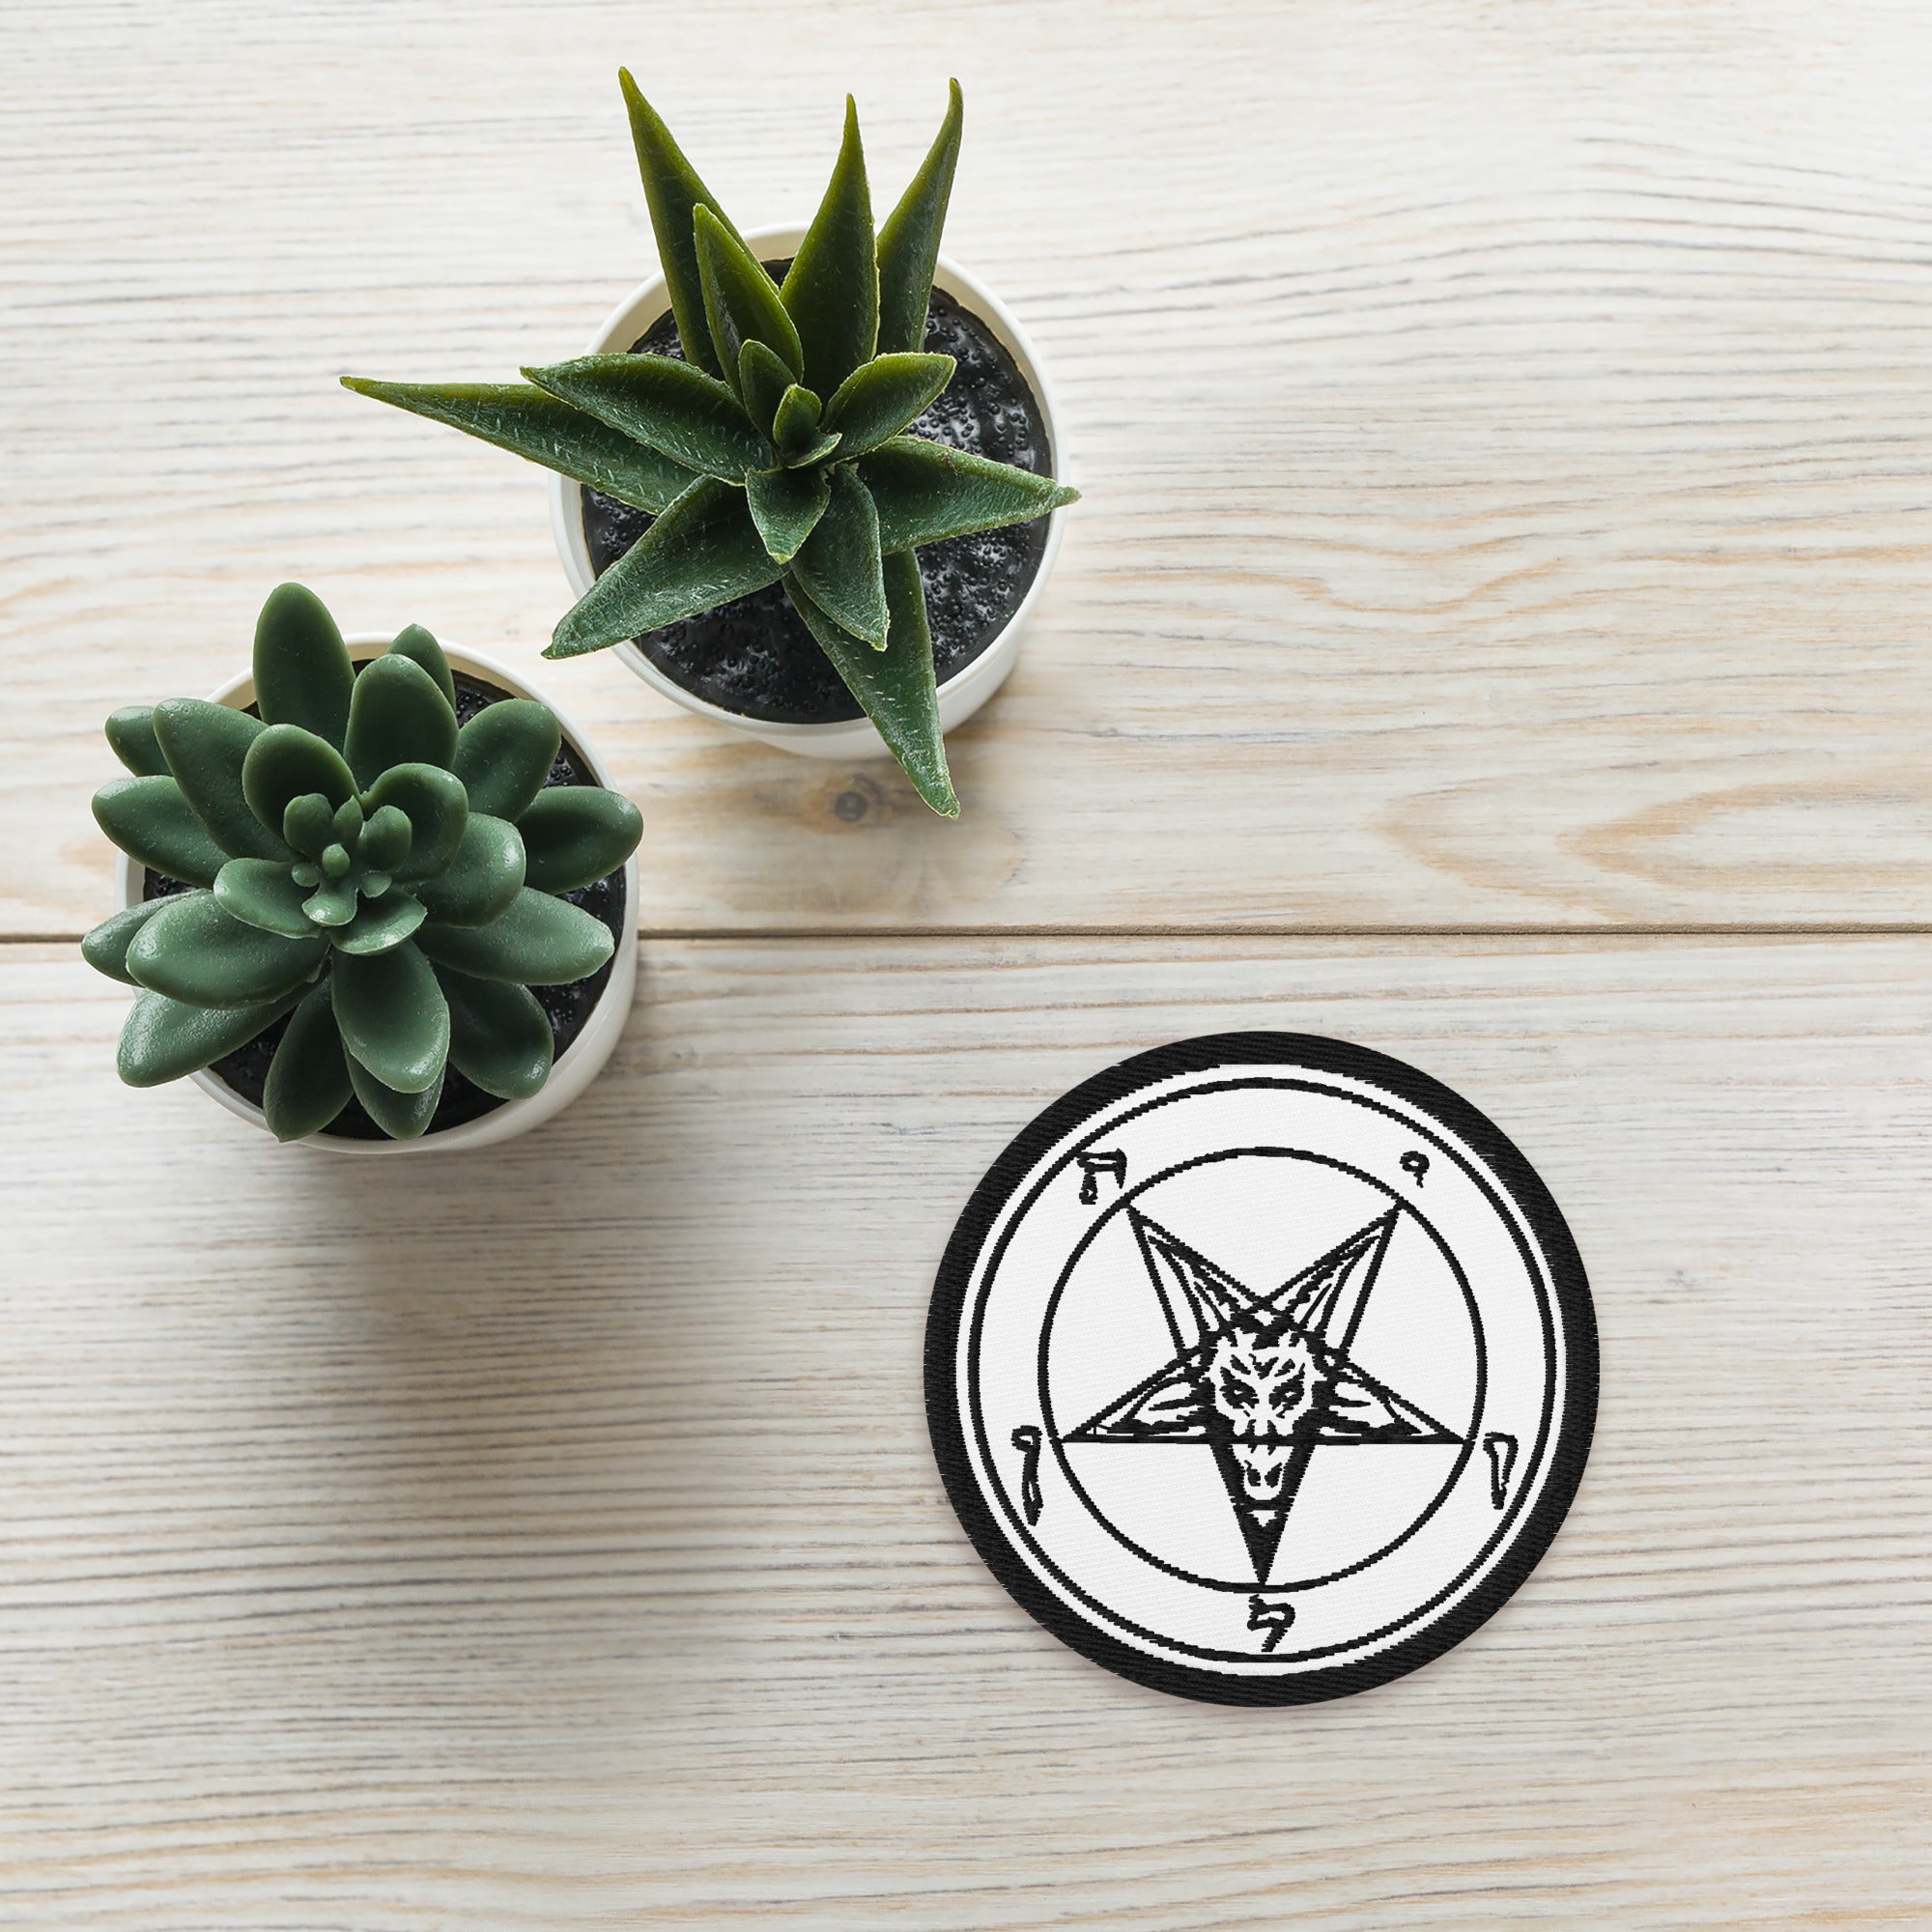 Black Sigil of Baphomet Occult Symbol Embroidered Patch - Edge of Life Designs